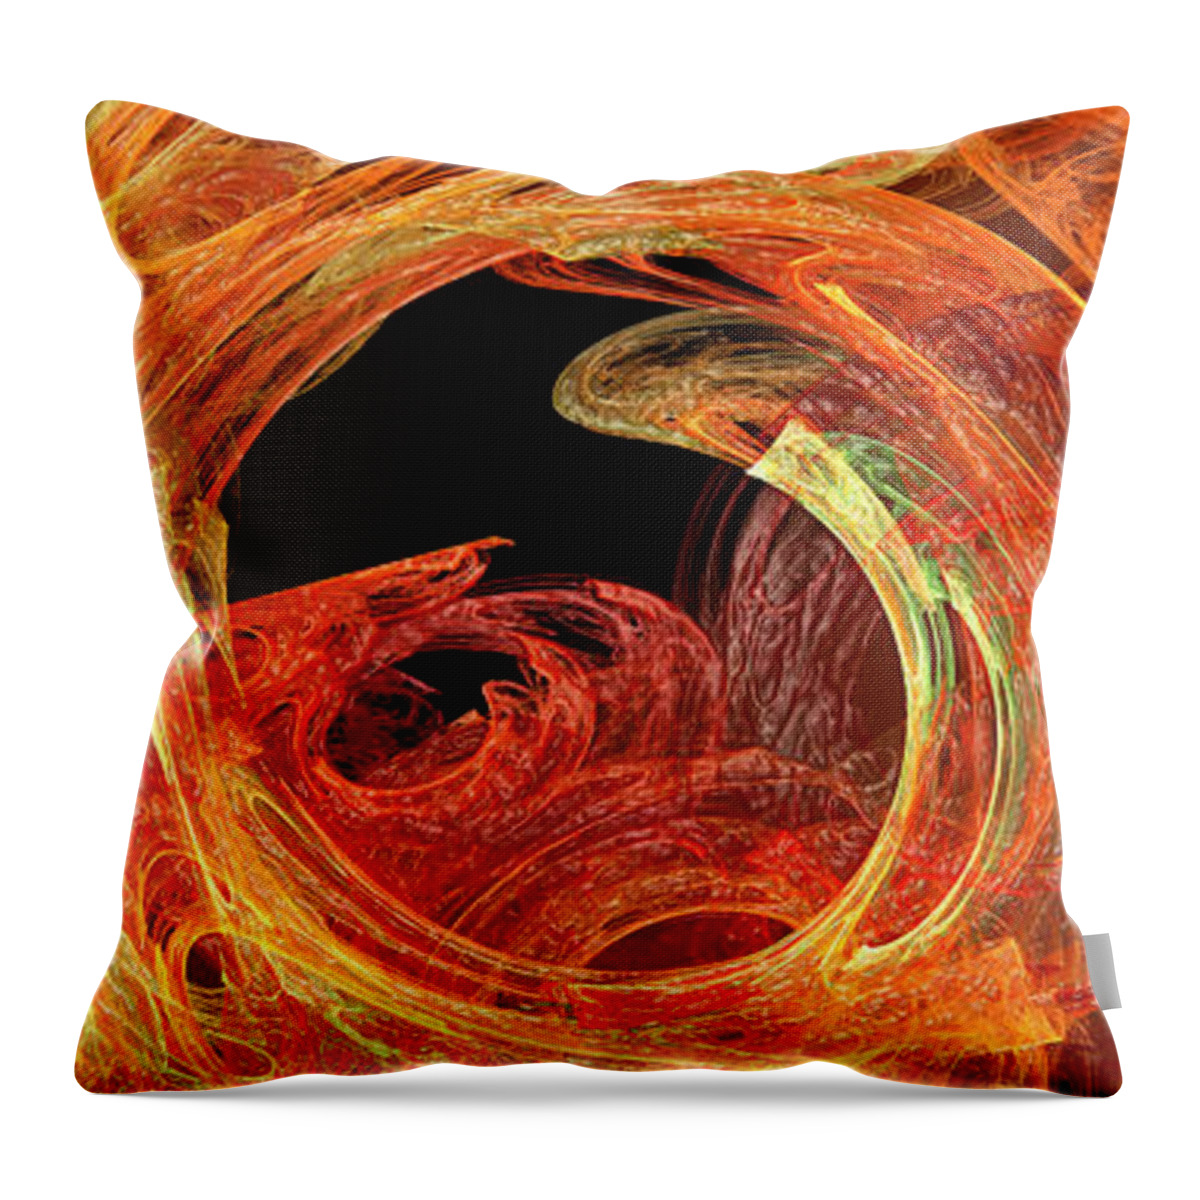 Abstract Throw Pillow featuring the digital art Autumn Waves 2 by Andee Design